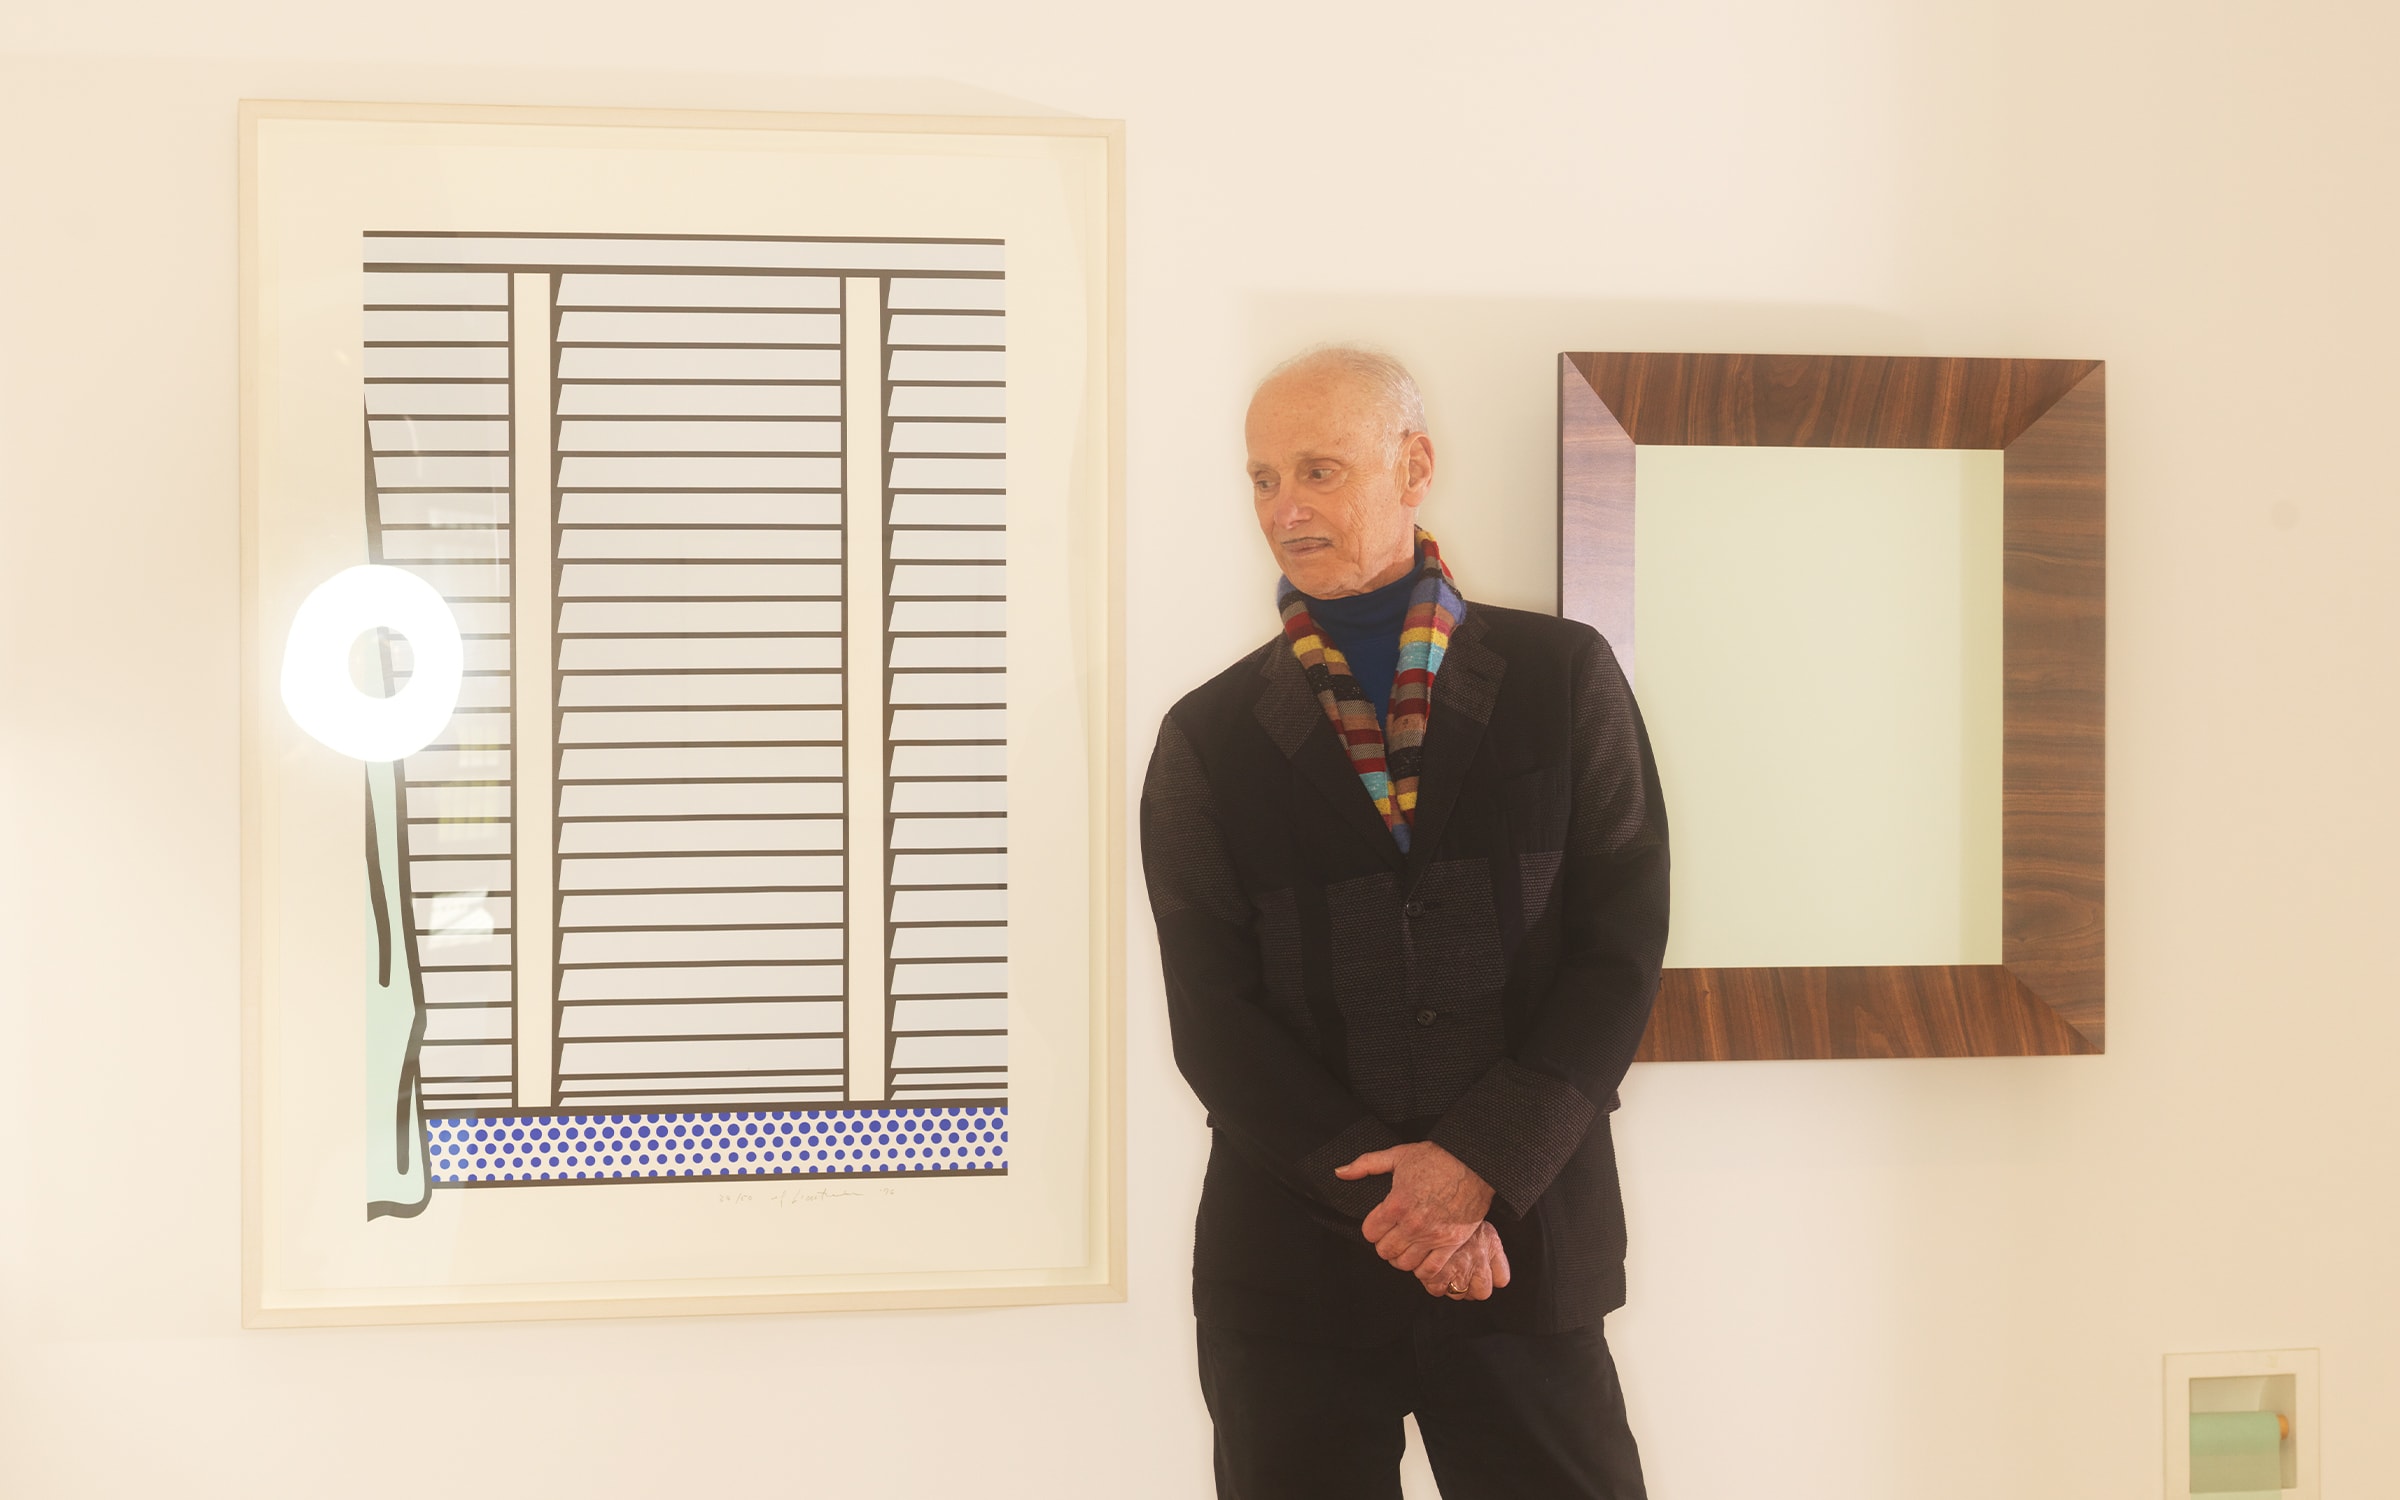 John Waters in his exhibition at the Baltimore Museum of Art, with Roy Lichtenstein's Venetian School II (1996) and Richard Artschwager's Mirror (1988), January 2023. Photograph by Matt Grubb for Art Basel.